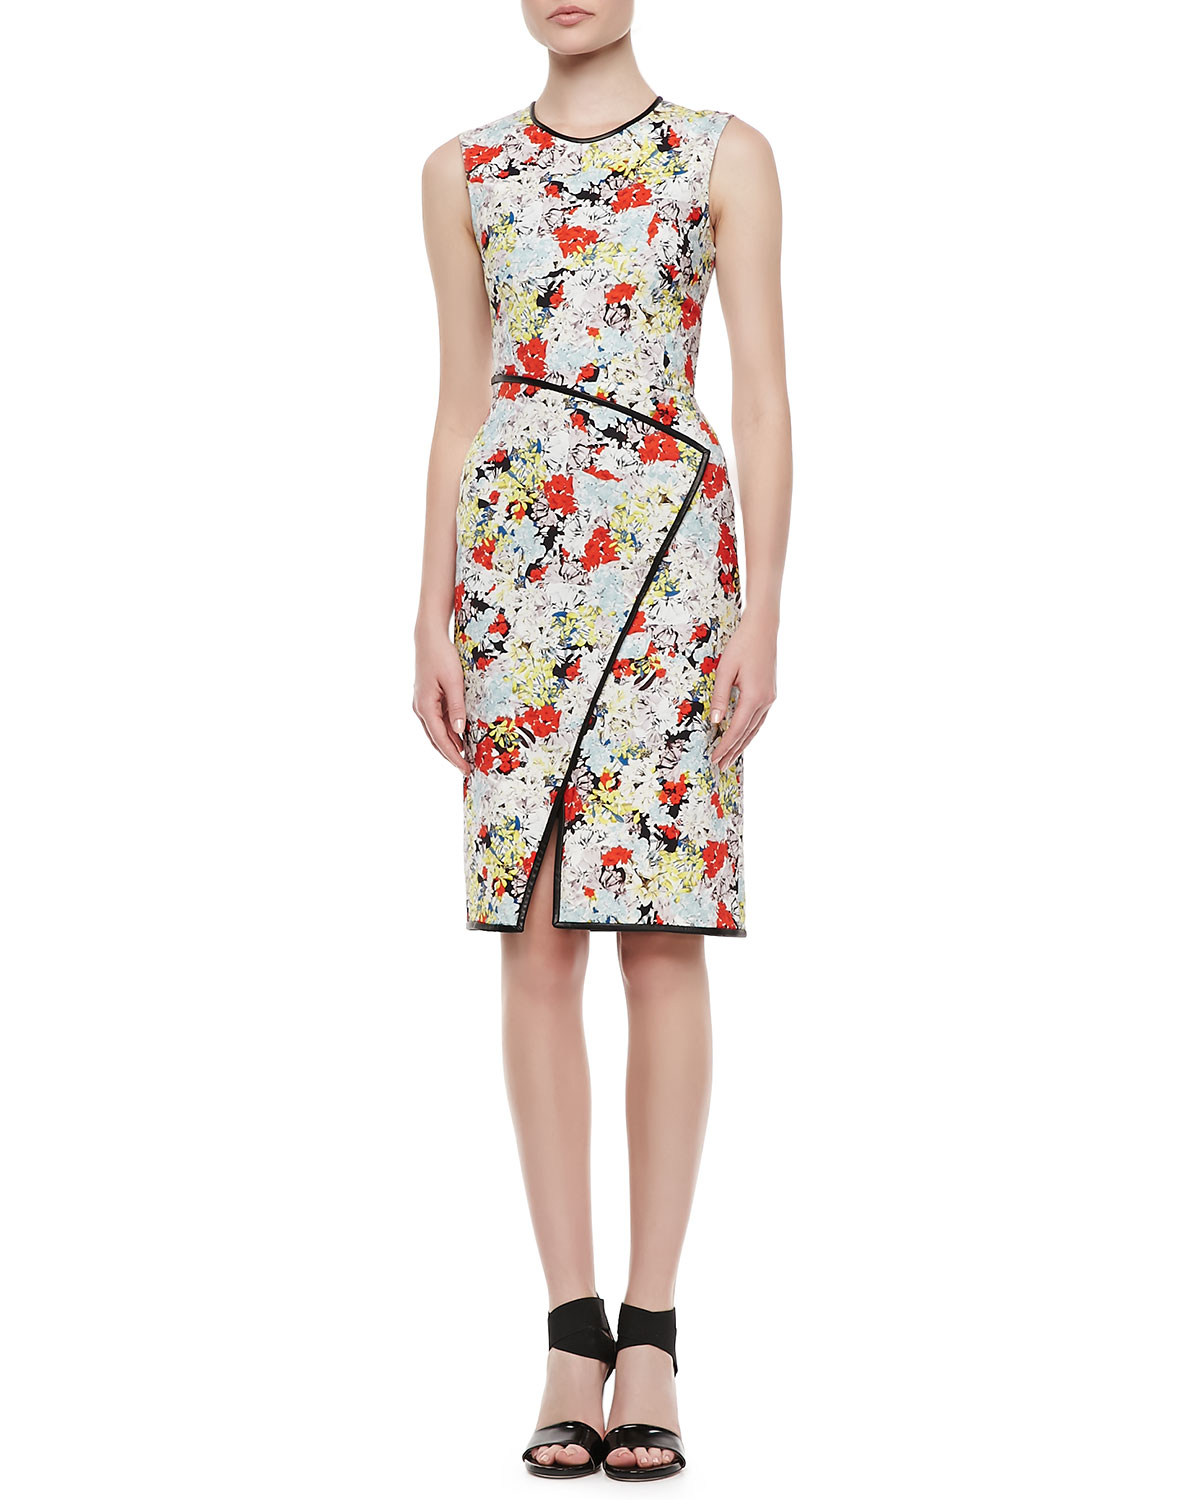 Erdem Fitted Floral Dress with Envelope Wrap Skirt in Multicolor (RED ...